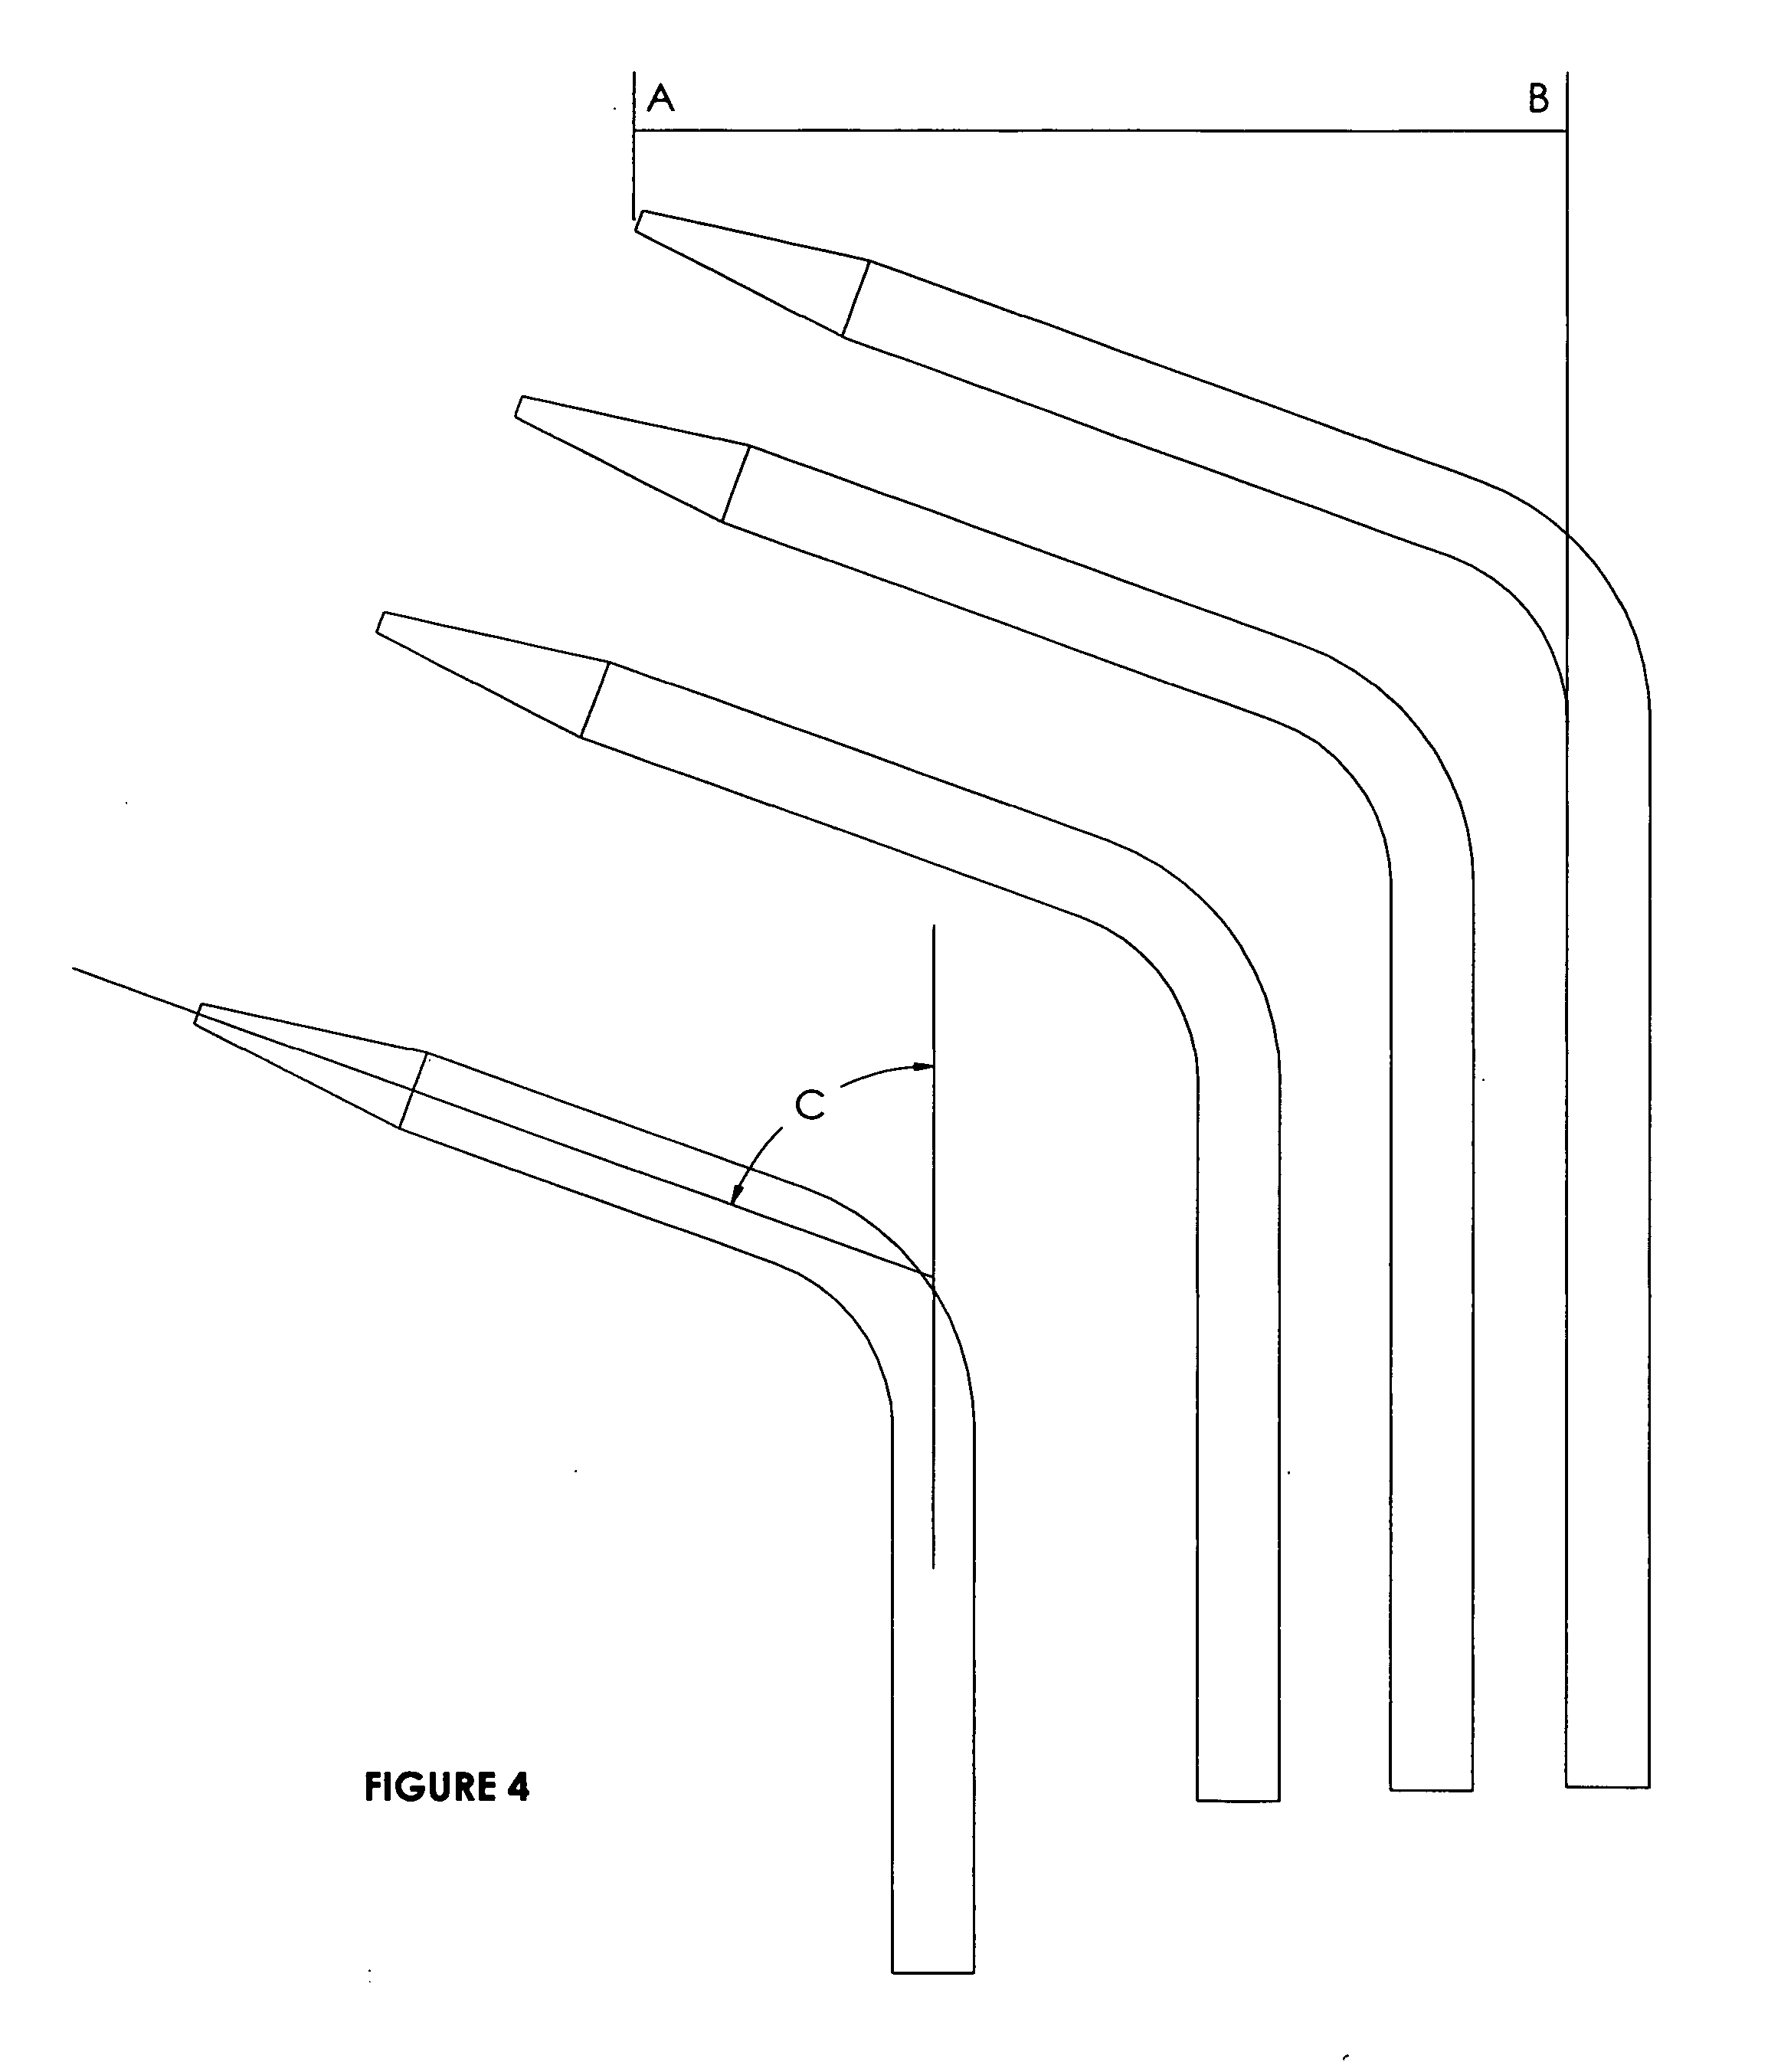 Cystotomy catheter capture device and methods of using same